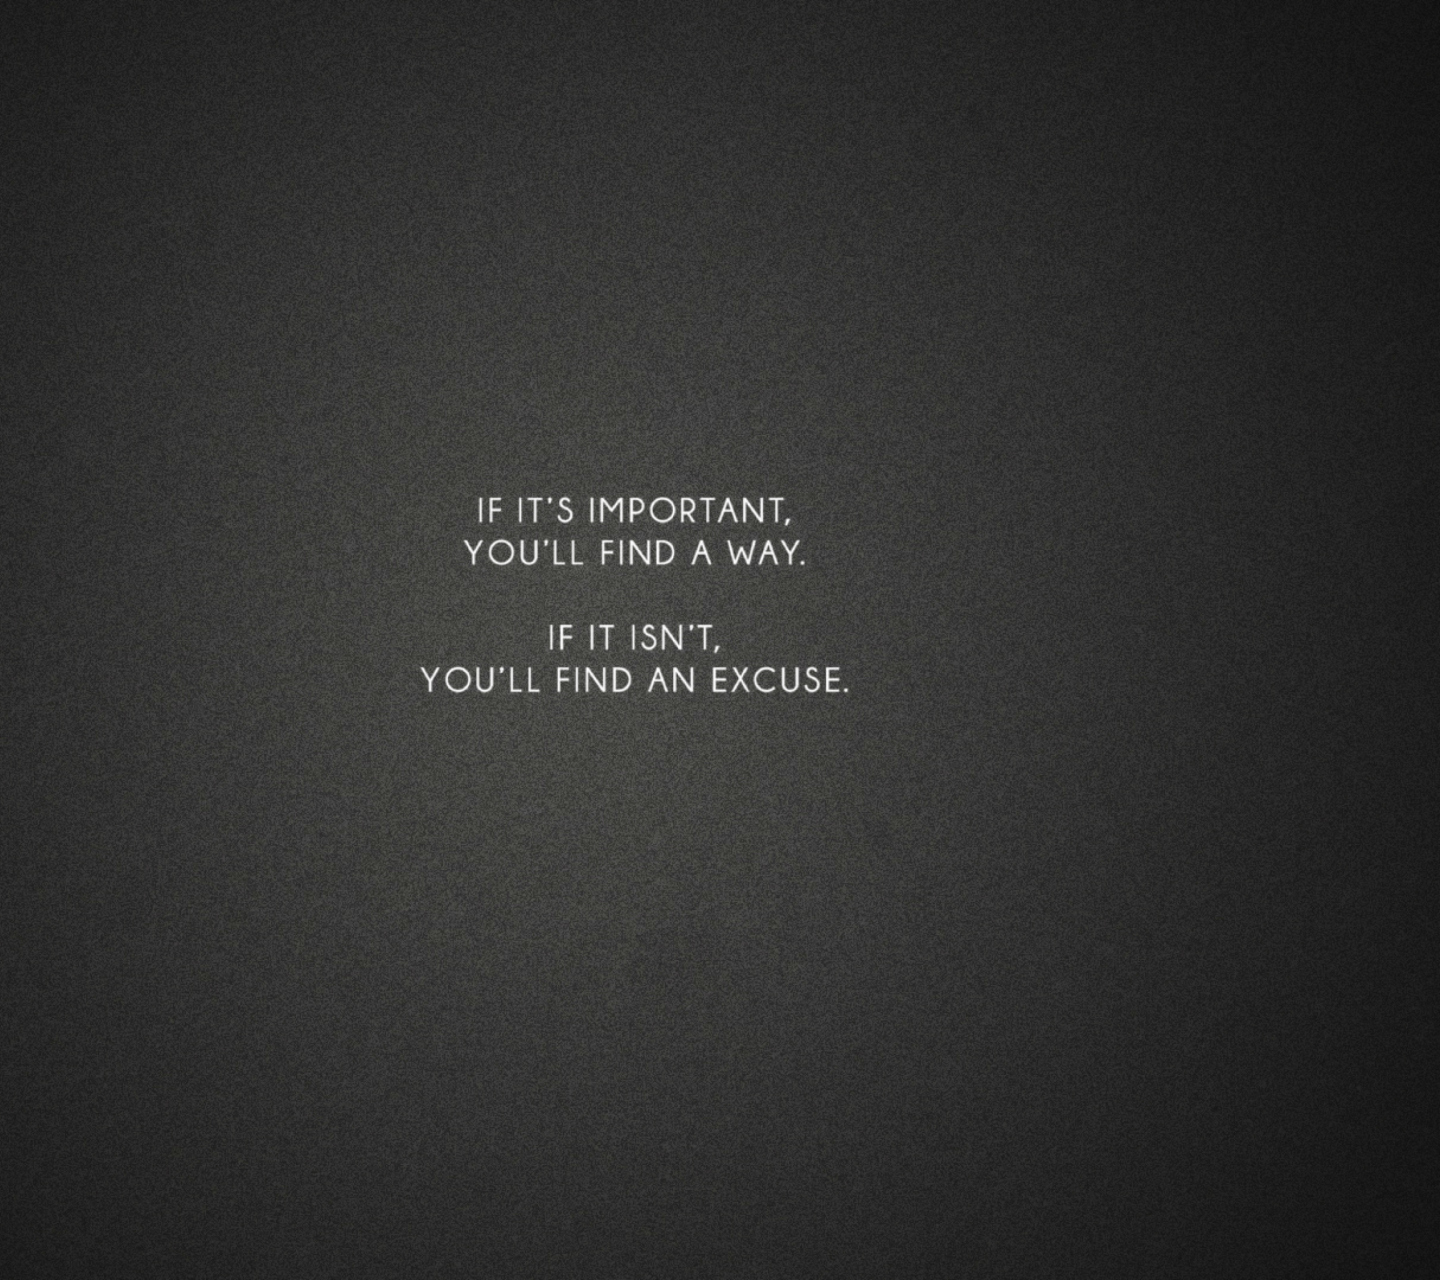 If It's Important You'll Find A Way wallpaper 1440x1280